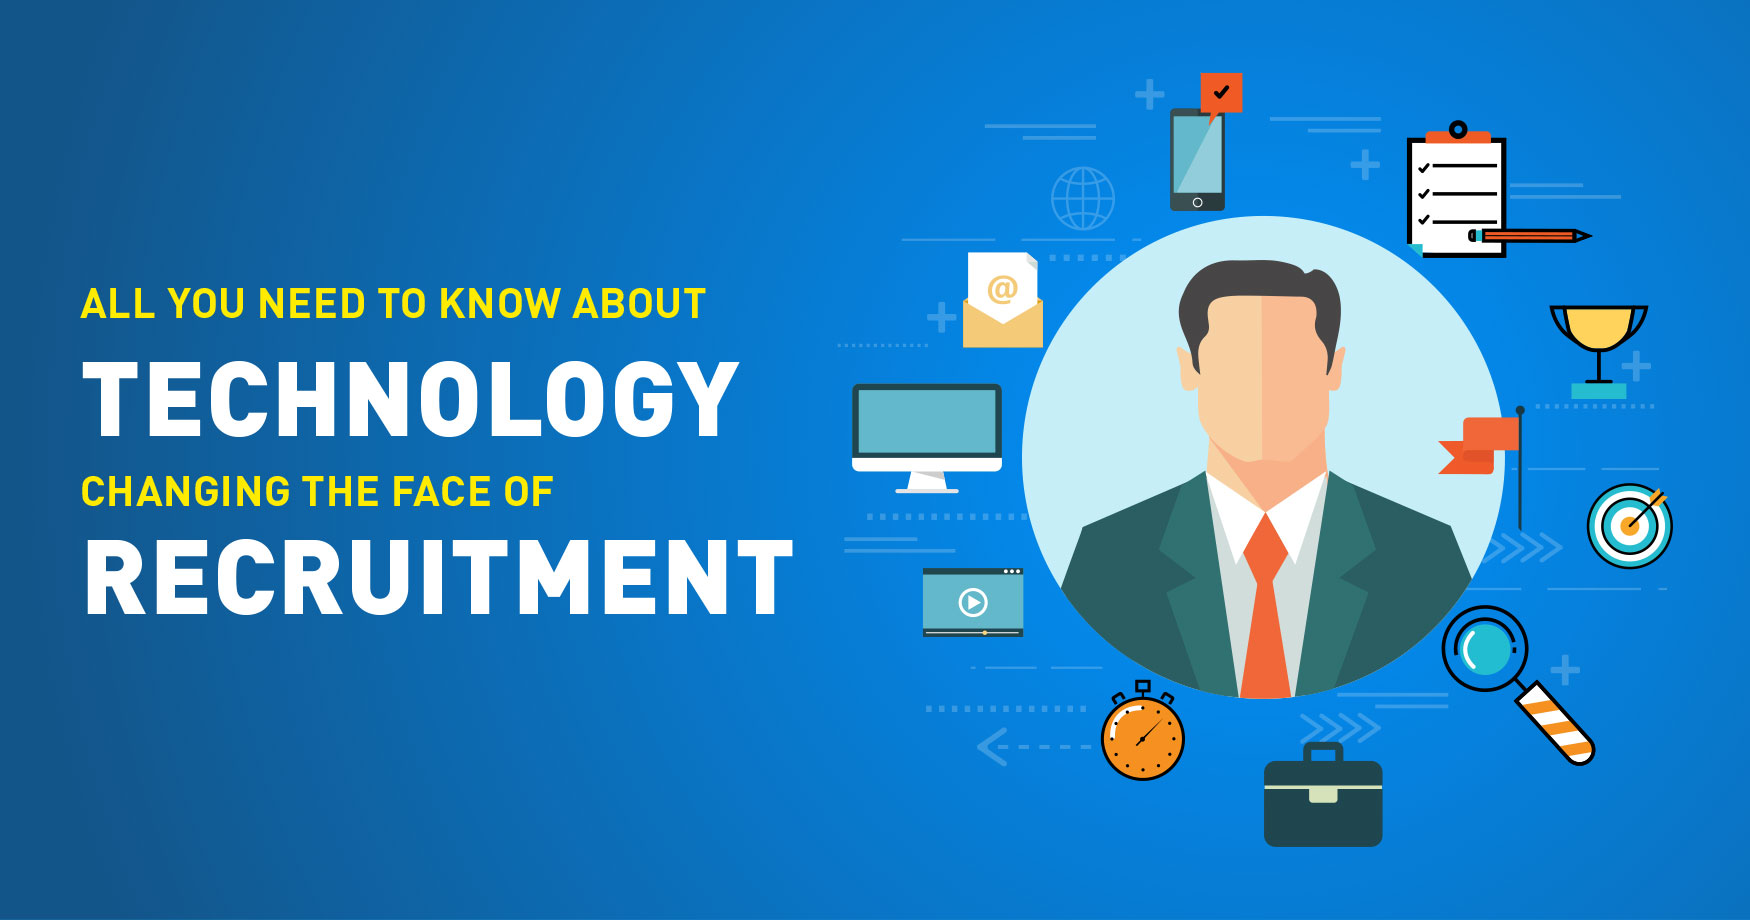 All you need to know about technology changing the face of recruitment